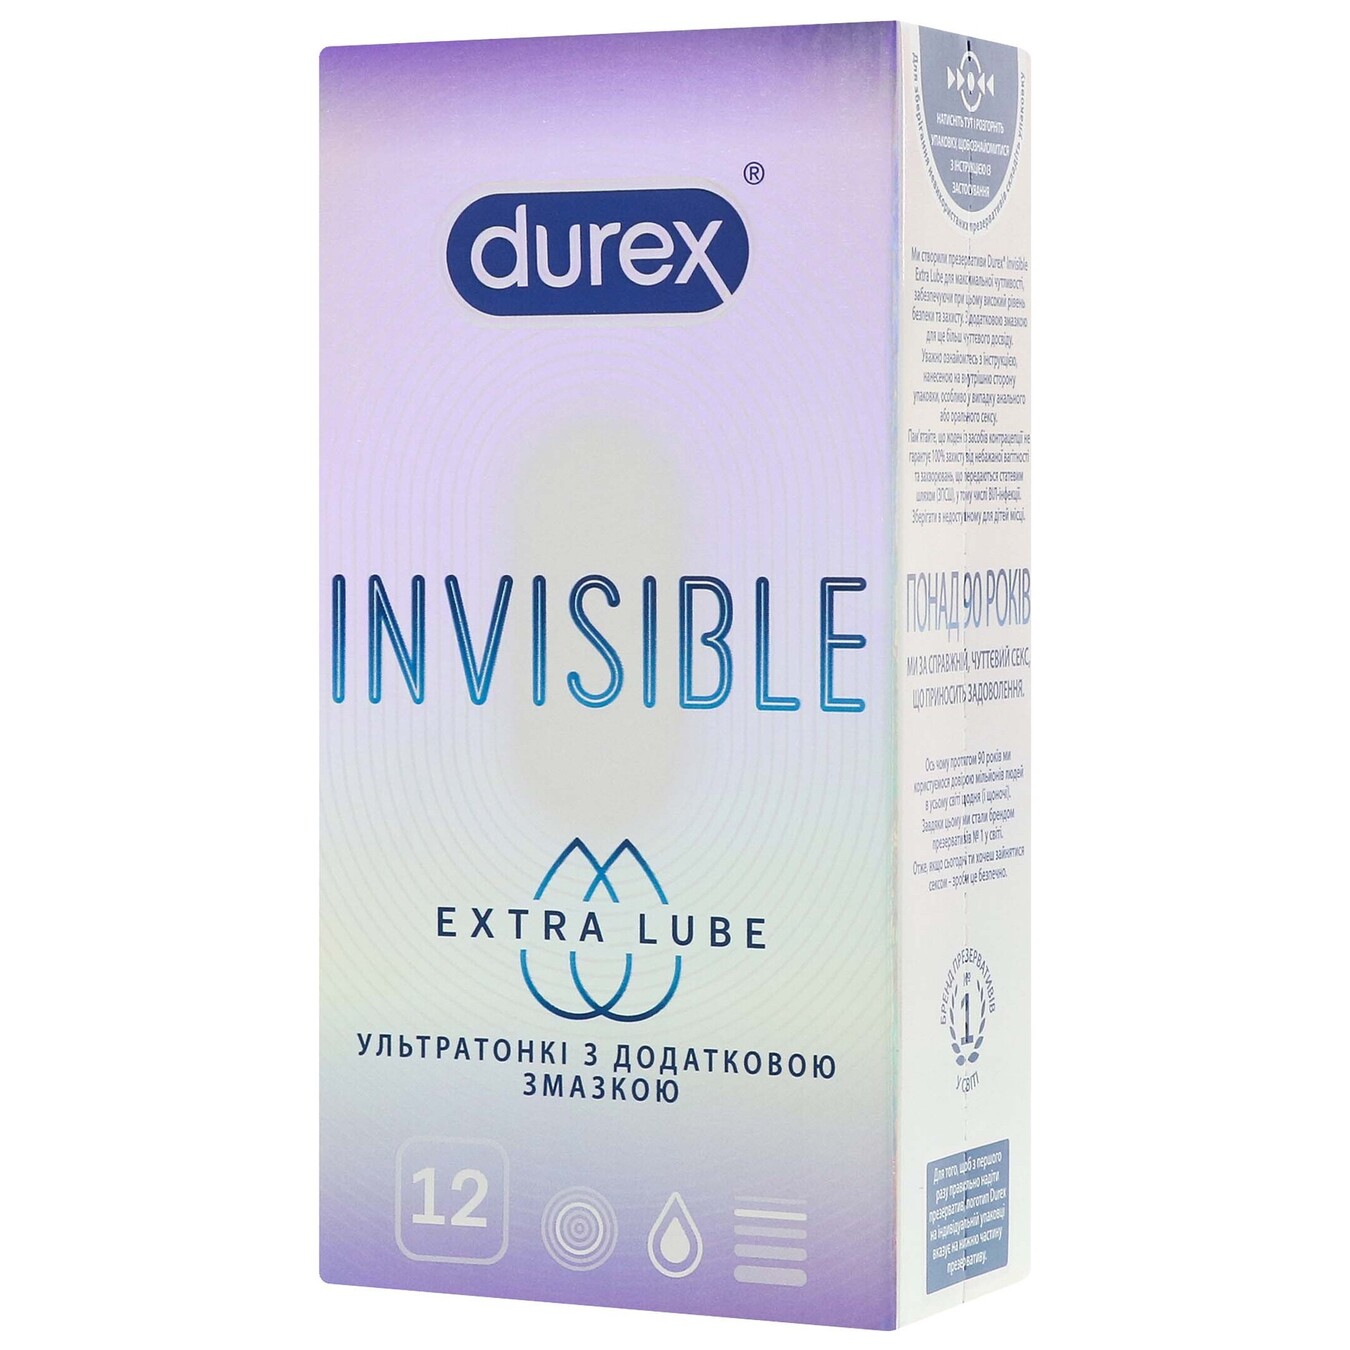 Durex #12 Invisible Extra Lube latex condoms with lubricant 3